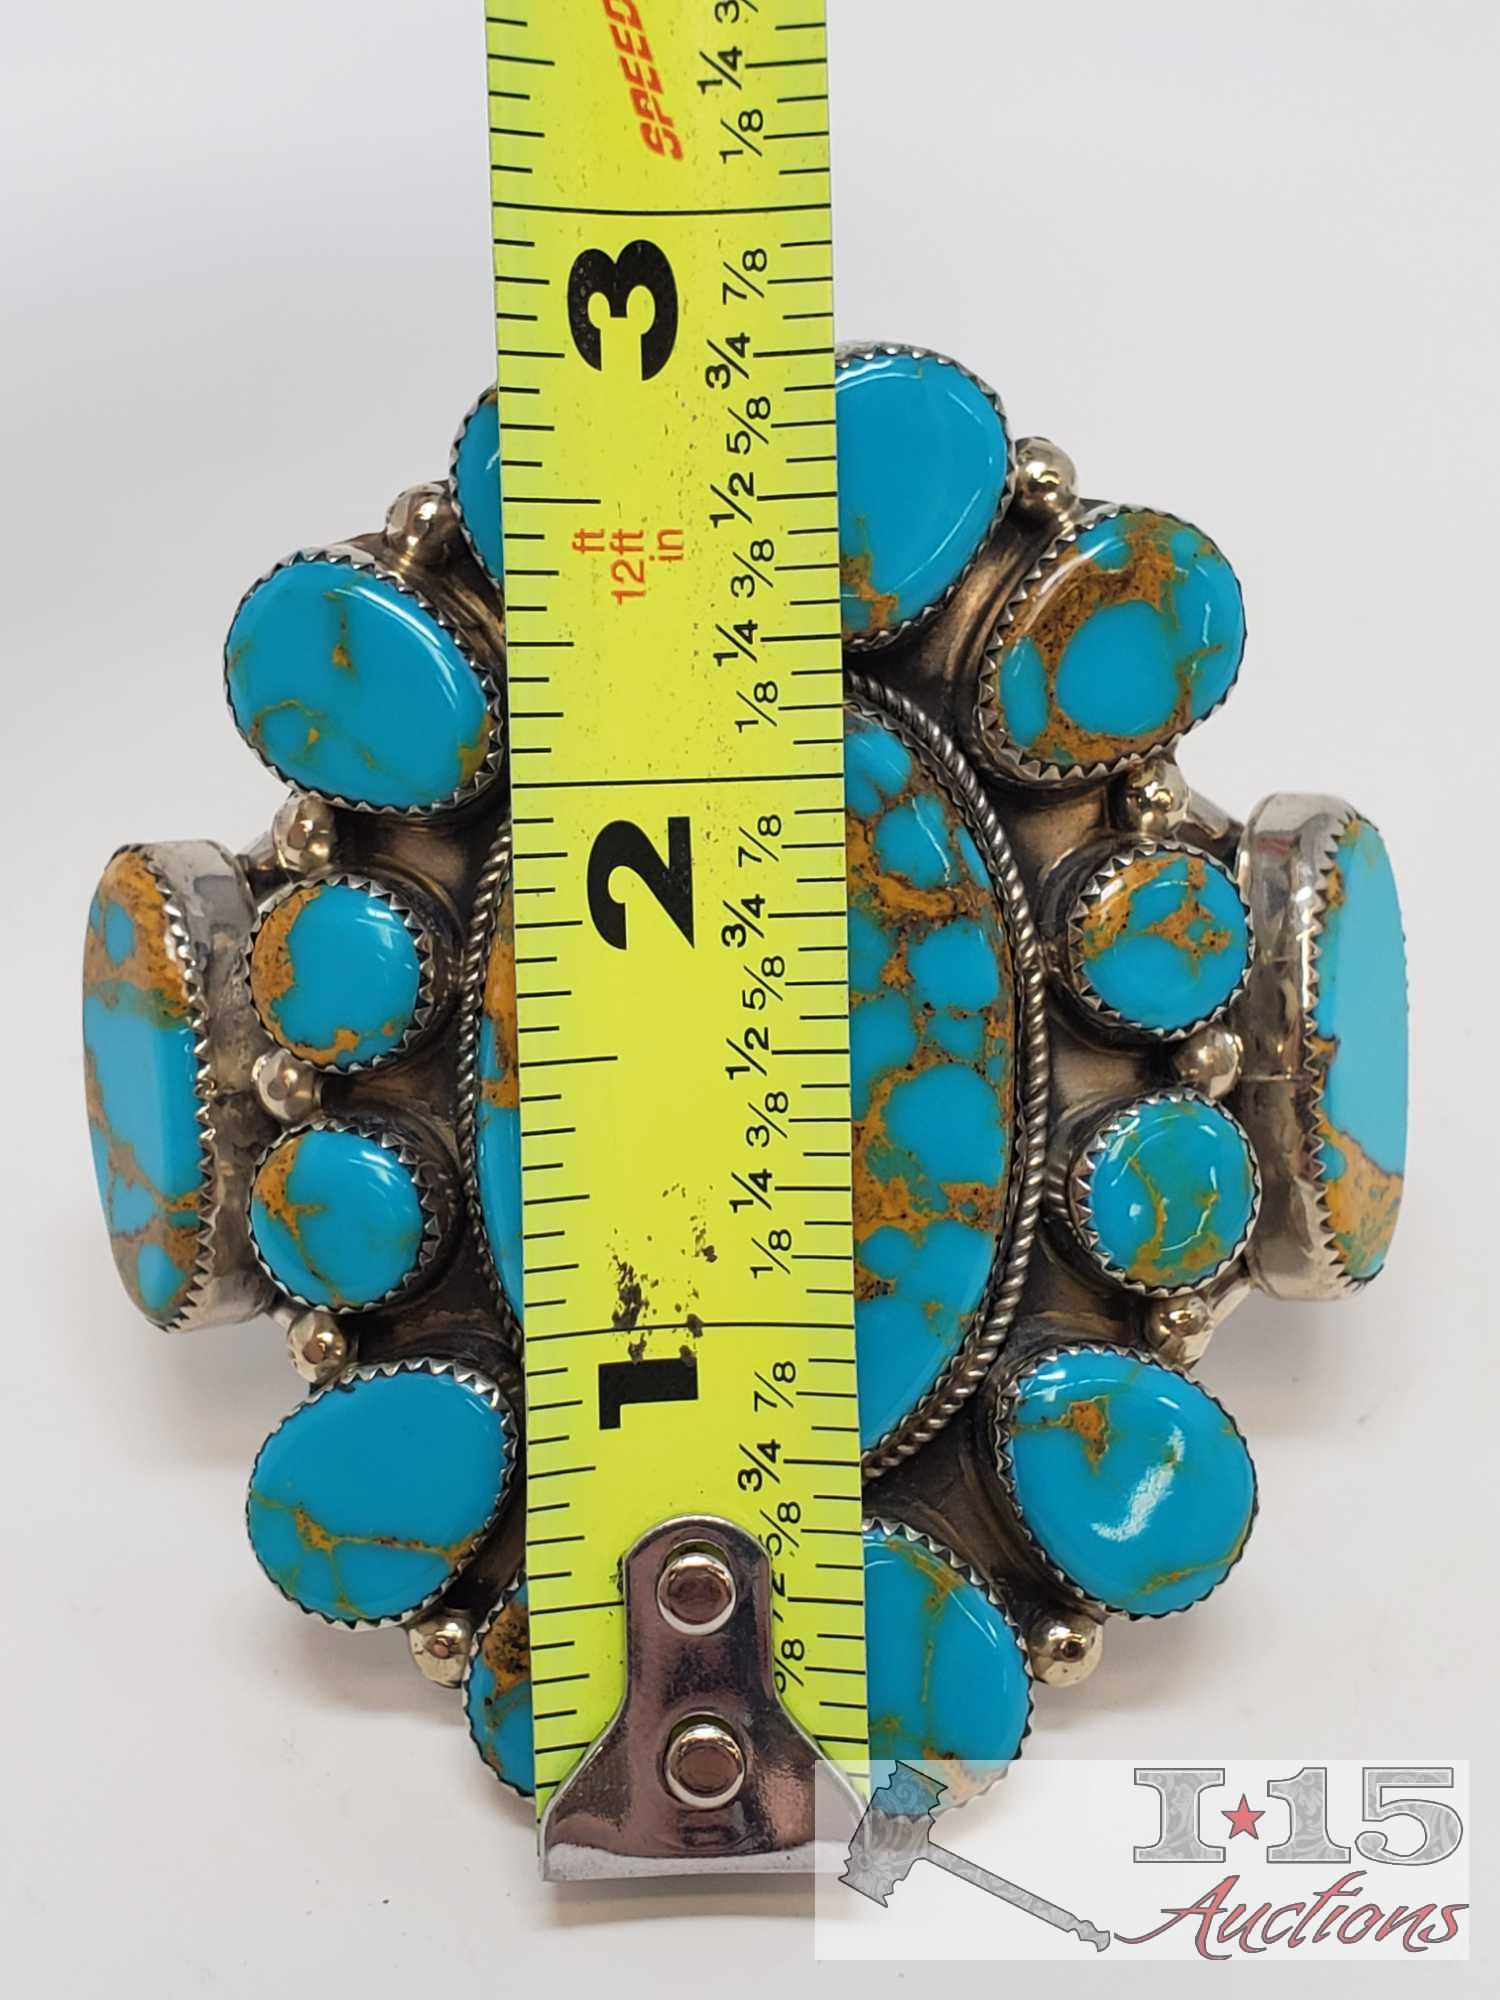 Arrow Marked Rare Large Sterling Silver Cuff Bracelet w/Large Brilliant Cluster Turquoise Stones.